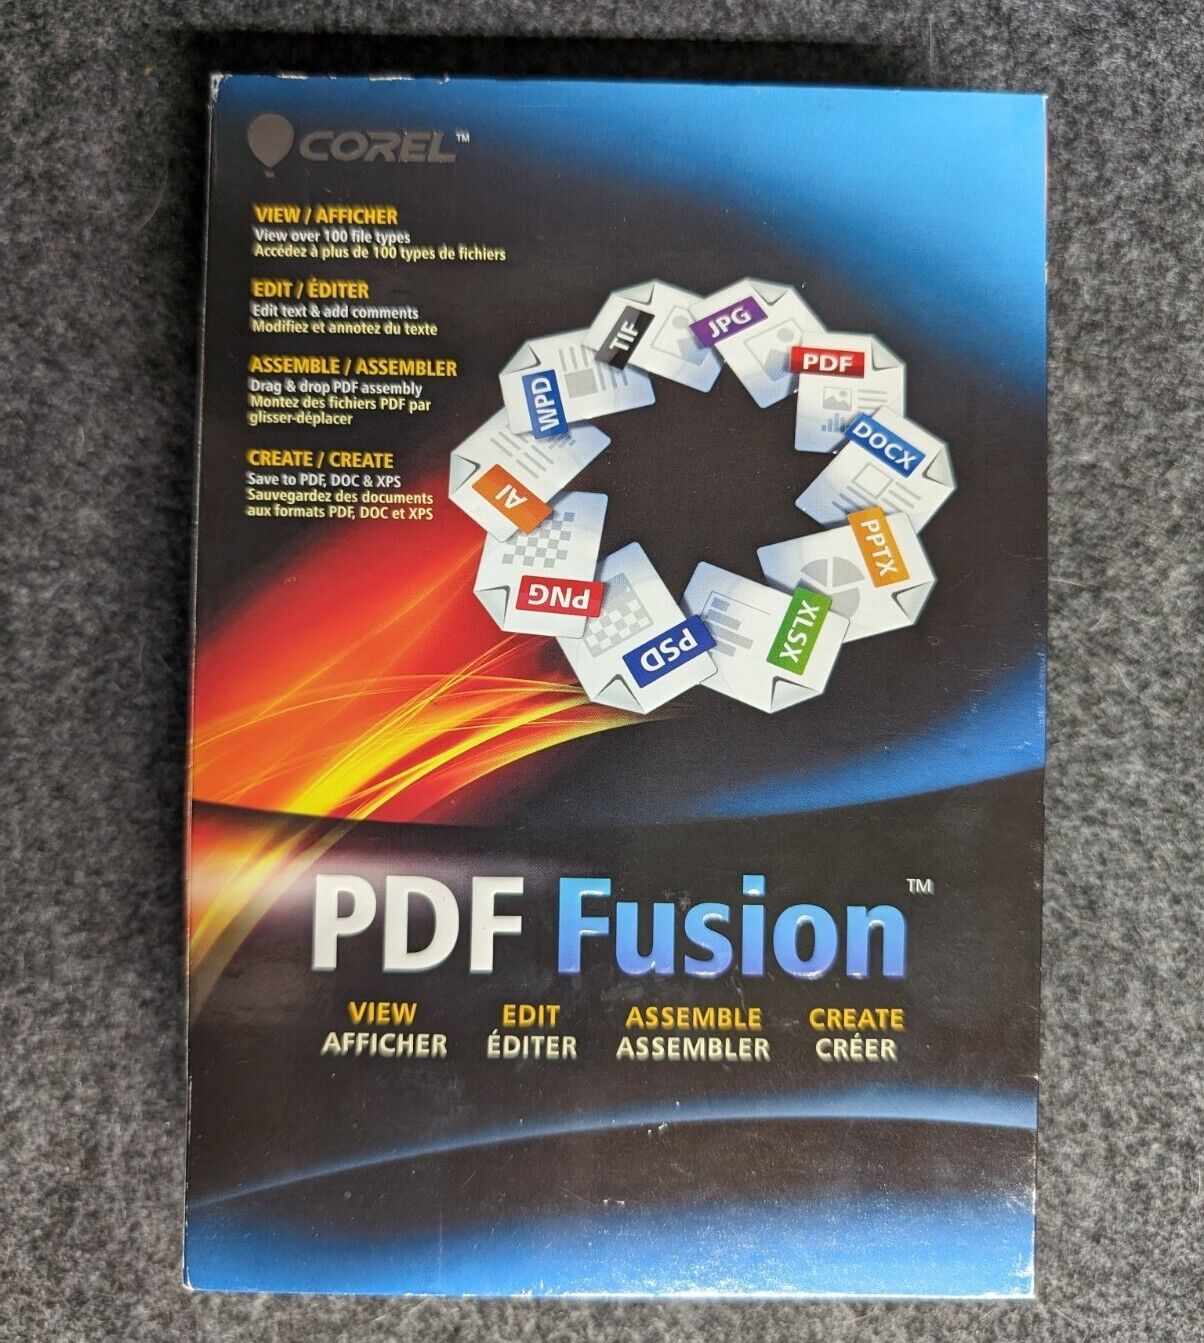 Corel PDF Fusion - Complete Product - 1 User - Standard - Sealed NEW - WINDOWS